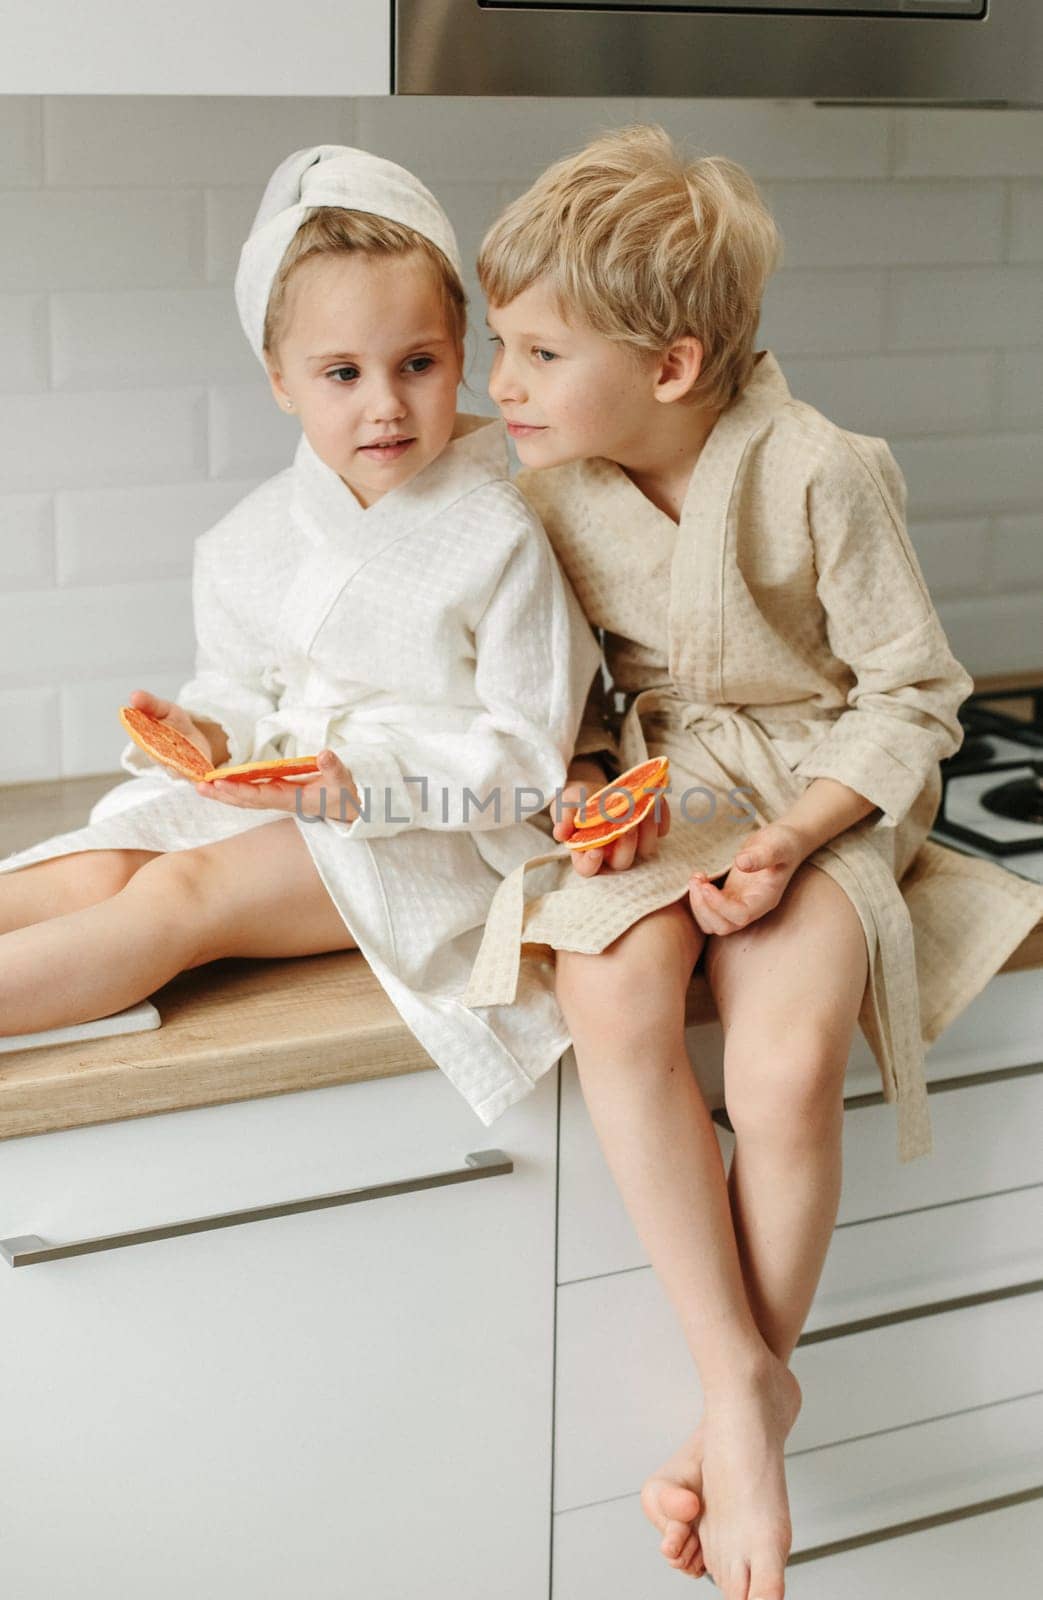 A boy and a girl in bathrobes are sitting in the kitchen talking, eating candied fruit by Sd28DimoN_1976